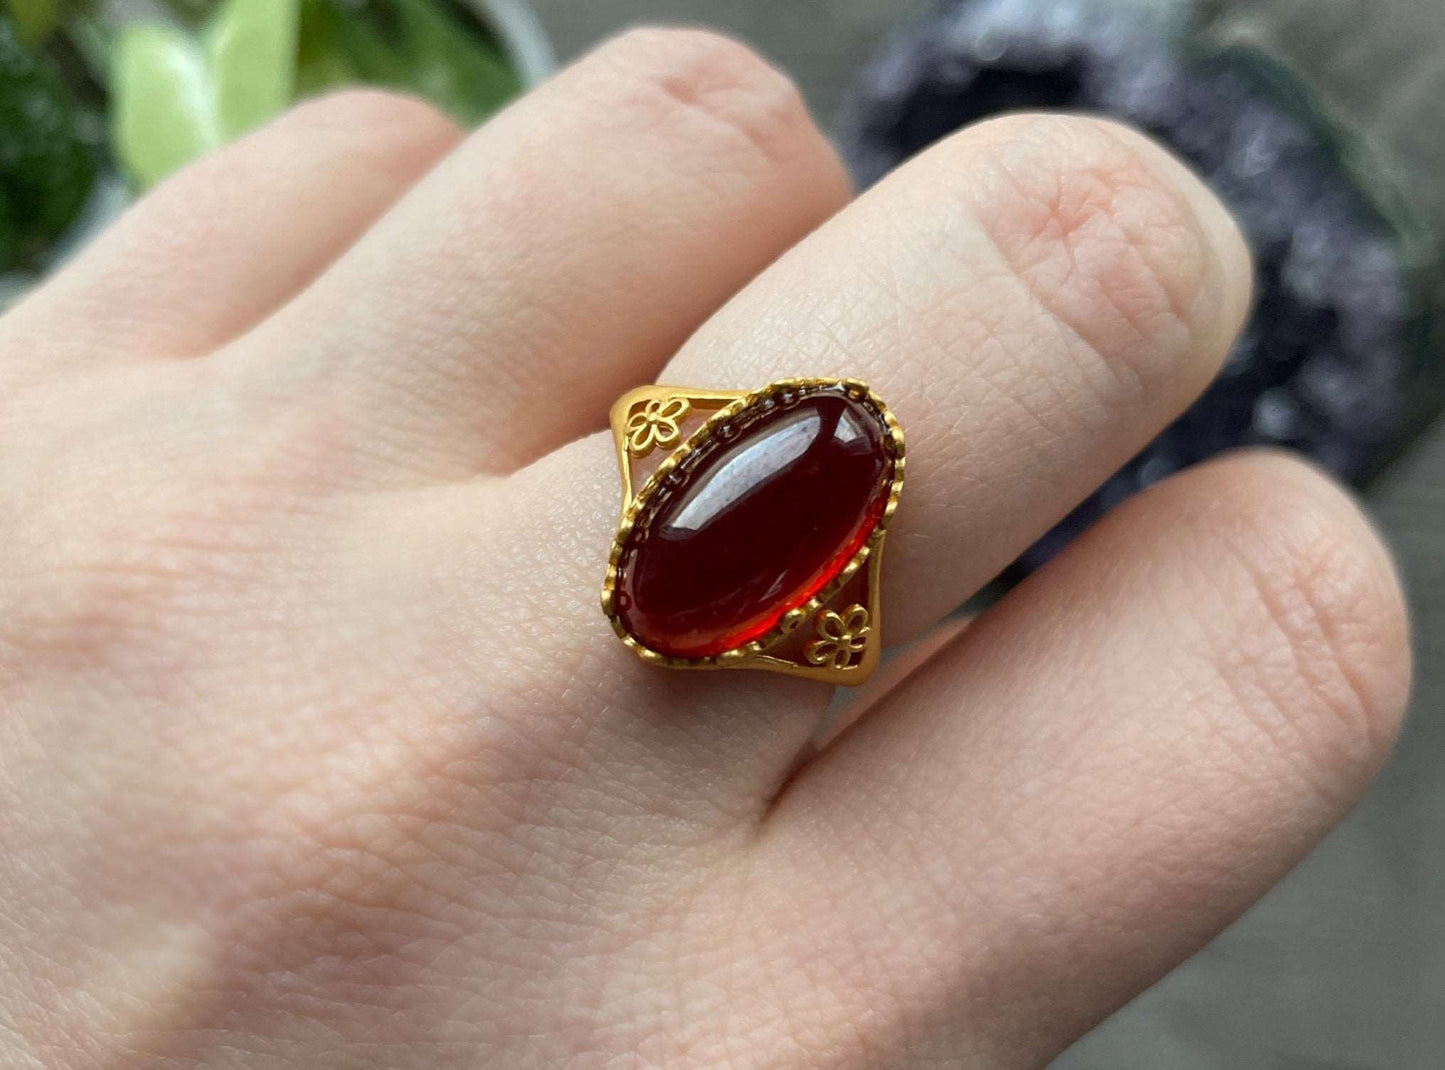 Pictured is a garnet gemstone set in an S925 sterling silver ring.